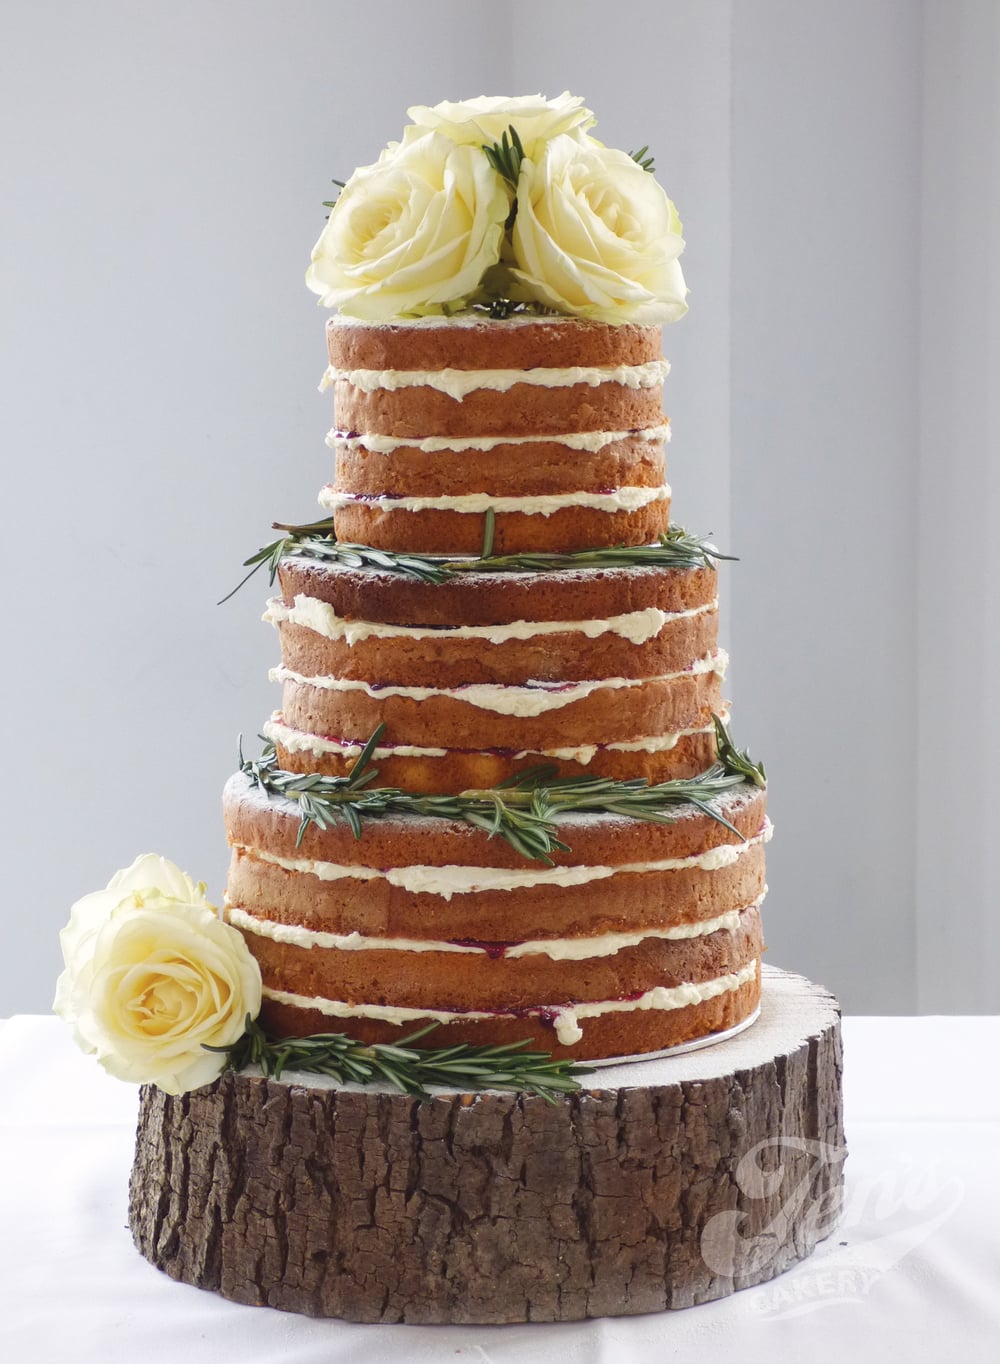  This naked cake looks beautiful with just sprigs of rosemary and fresh roses. 